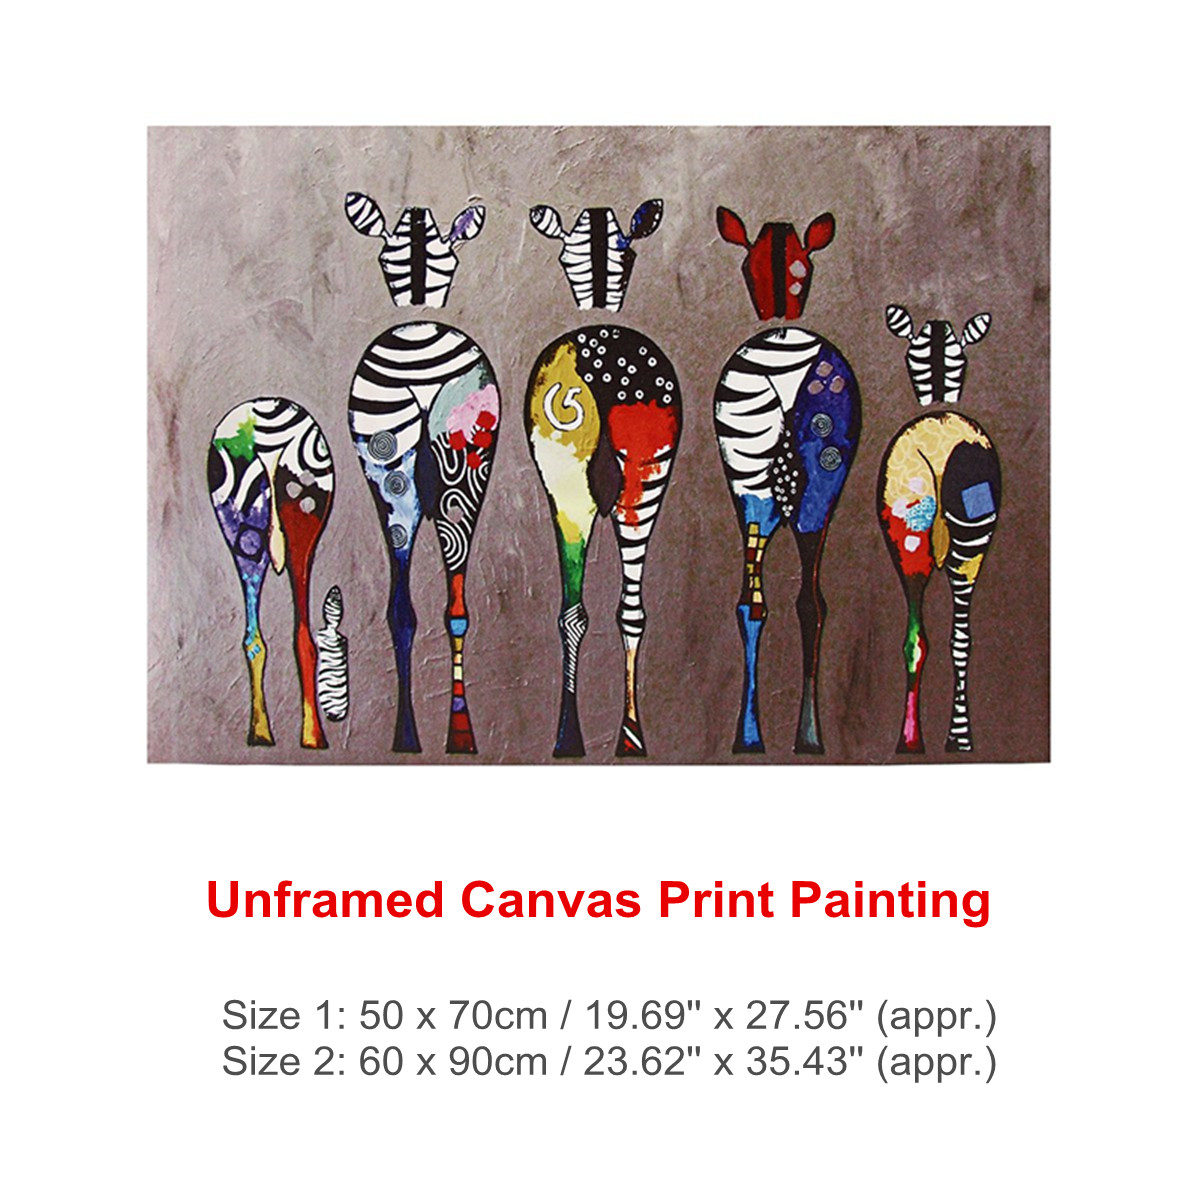 Unframed-Multicolored-Canvas-Prints-Paintings-Home-Decor-Wall-Art-Picture-1639672-5